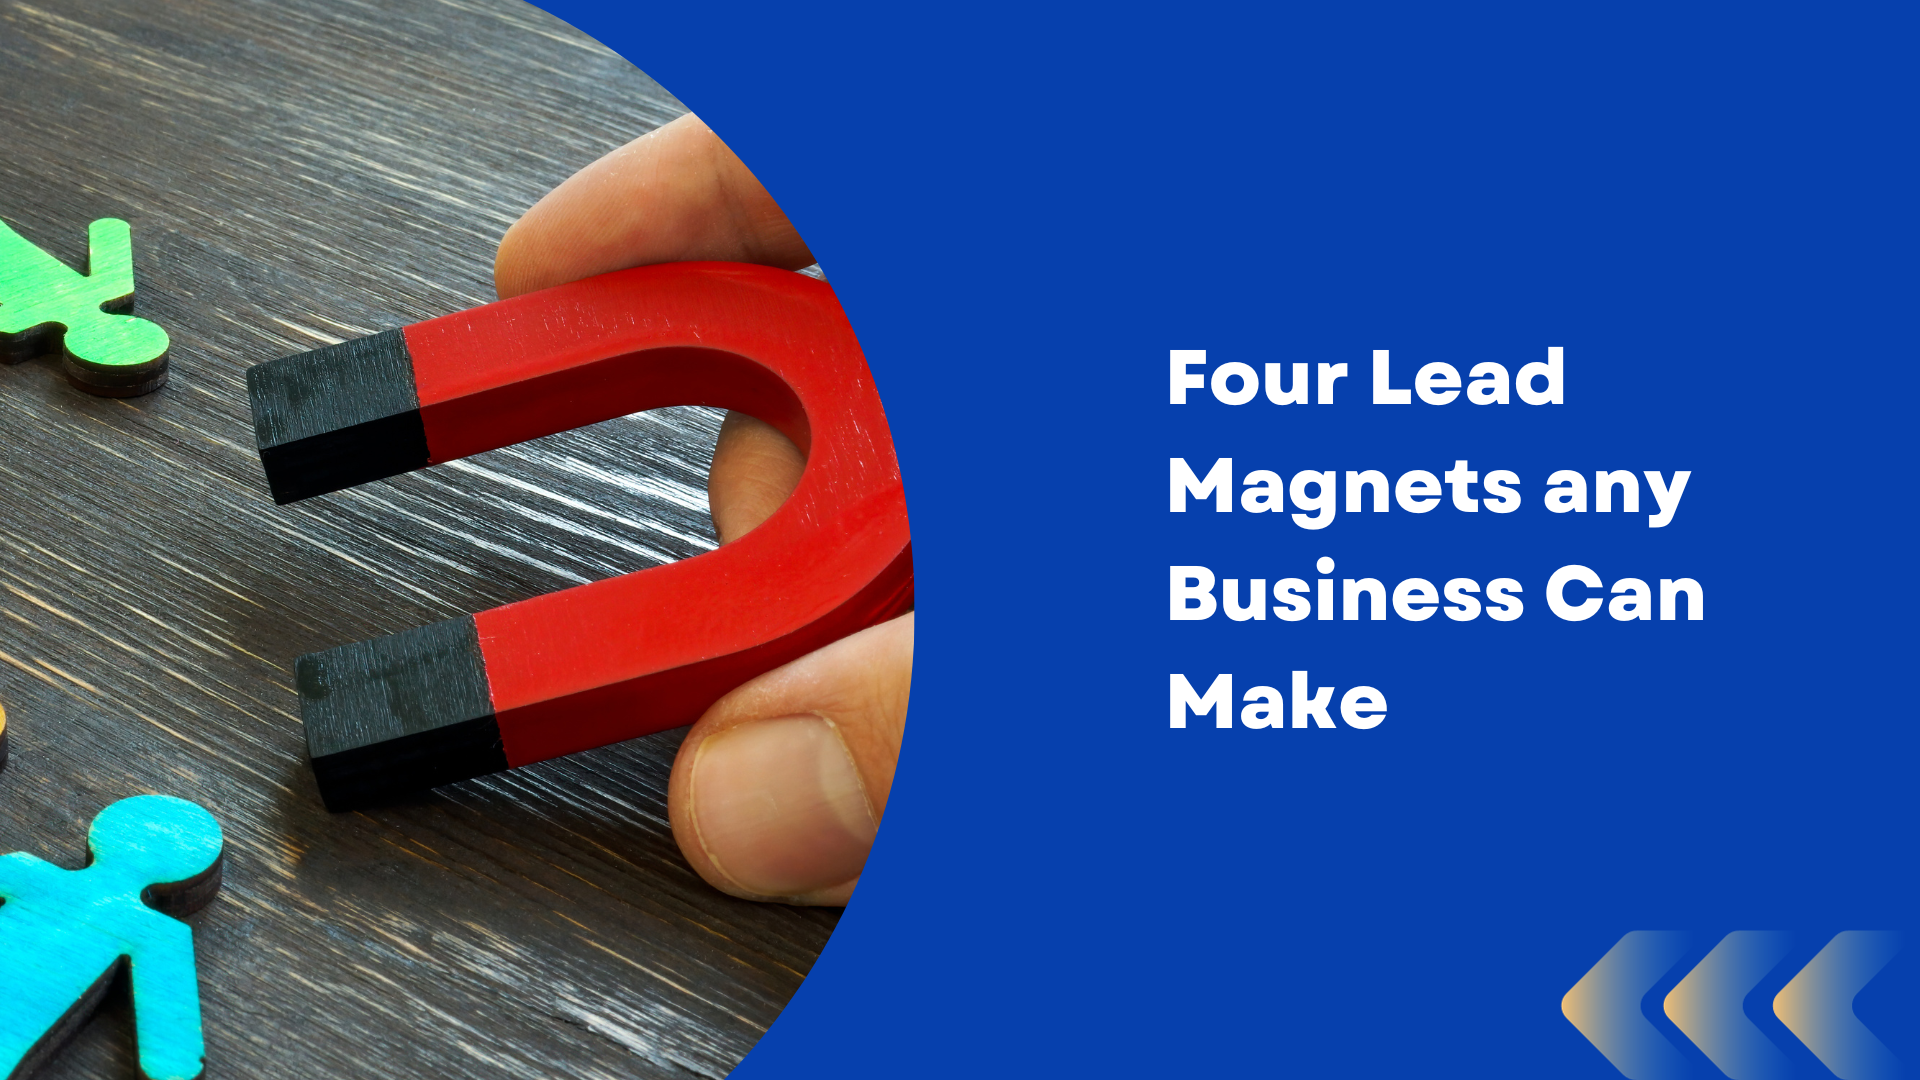 The Four Lead Magnets Any Business Can Make